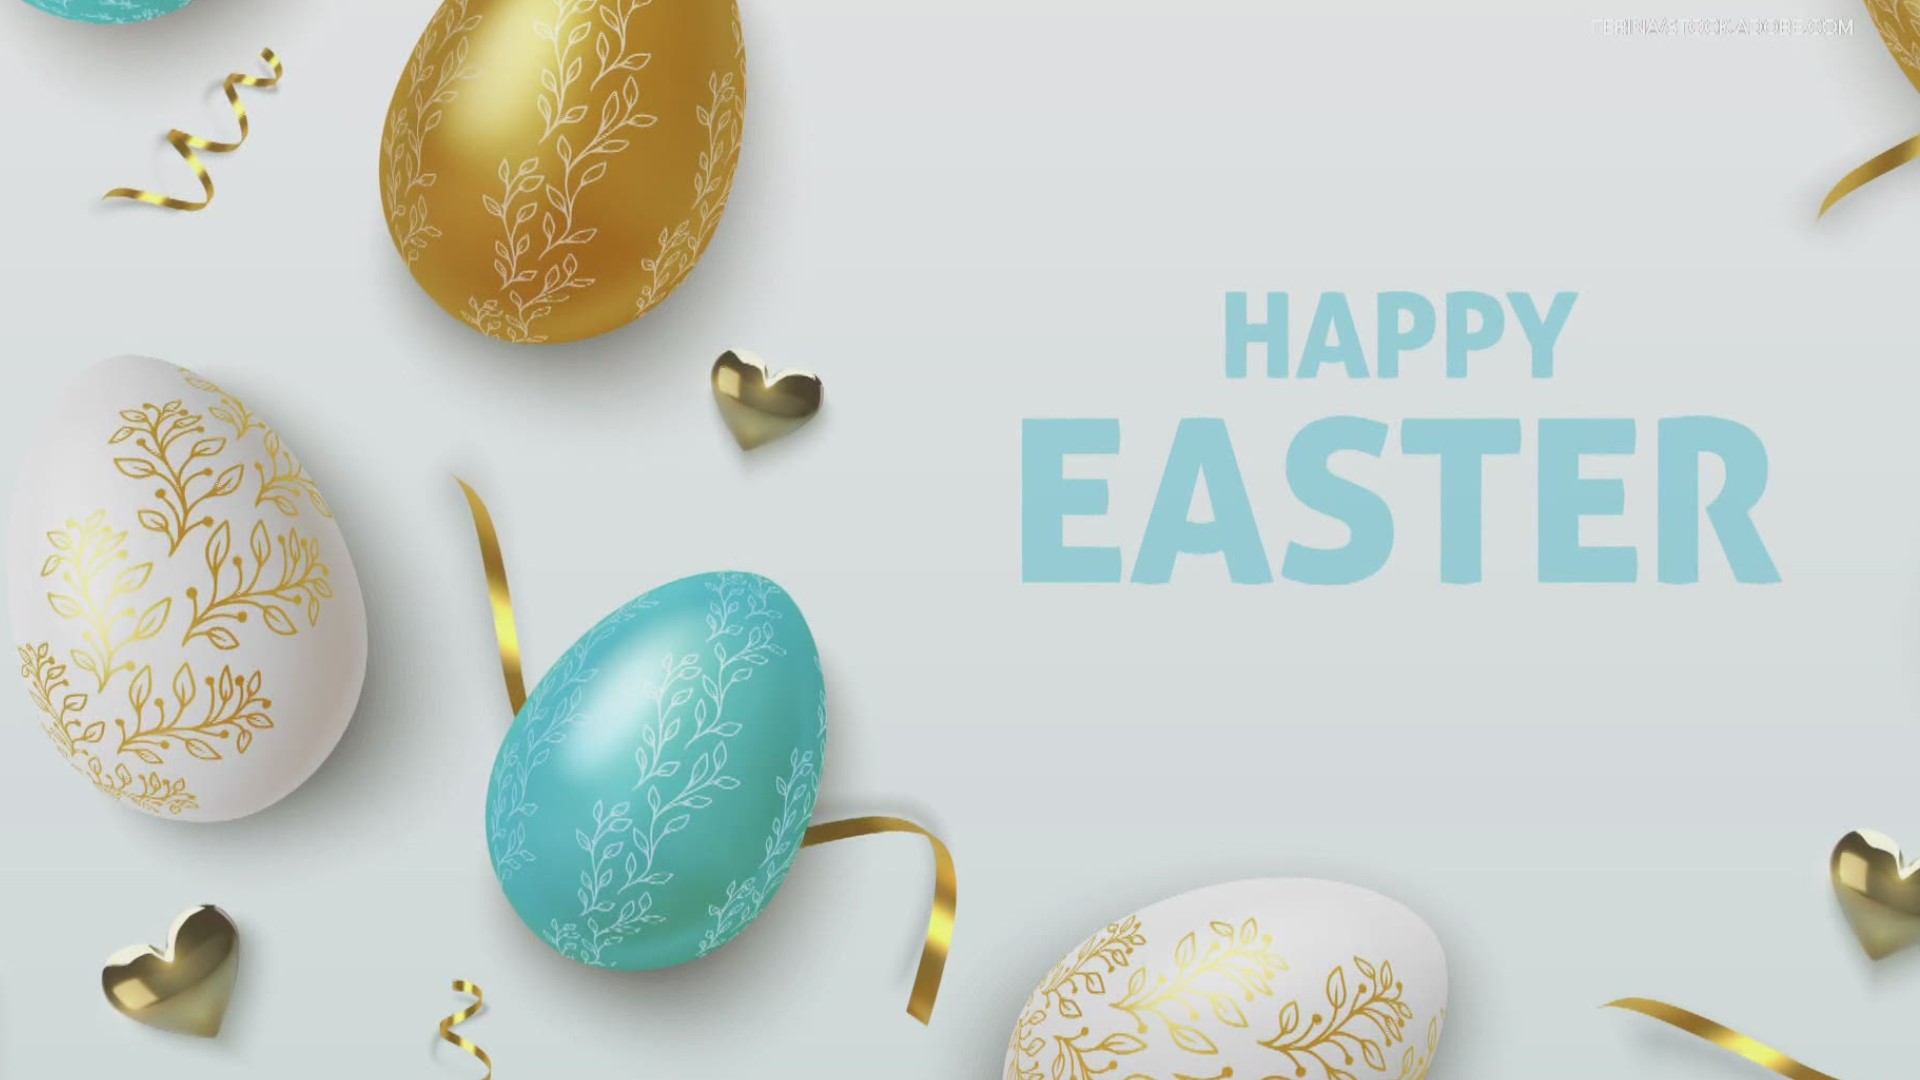 Create a memorable Easter on a budget this year.